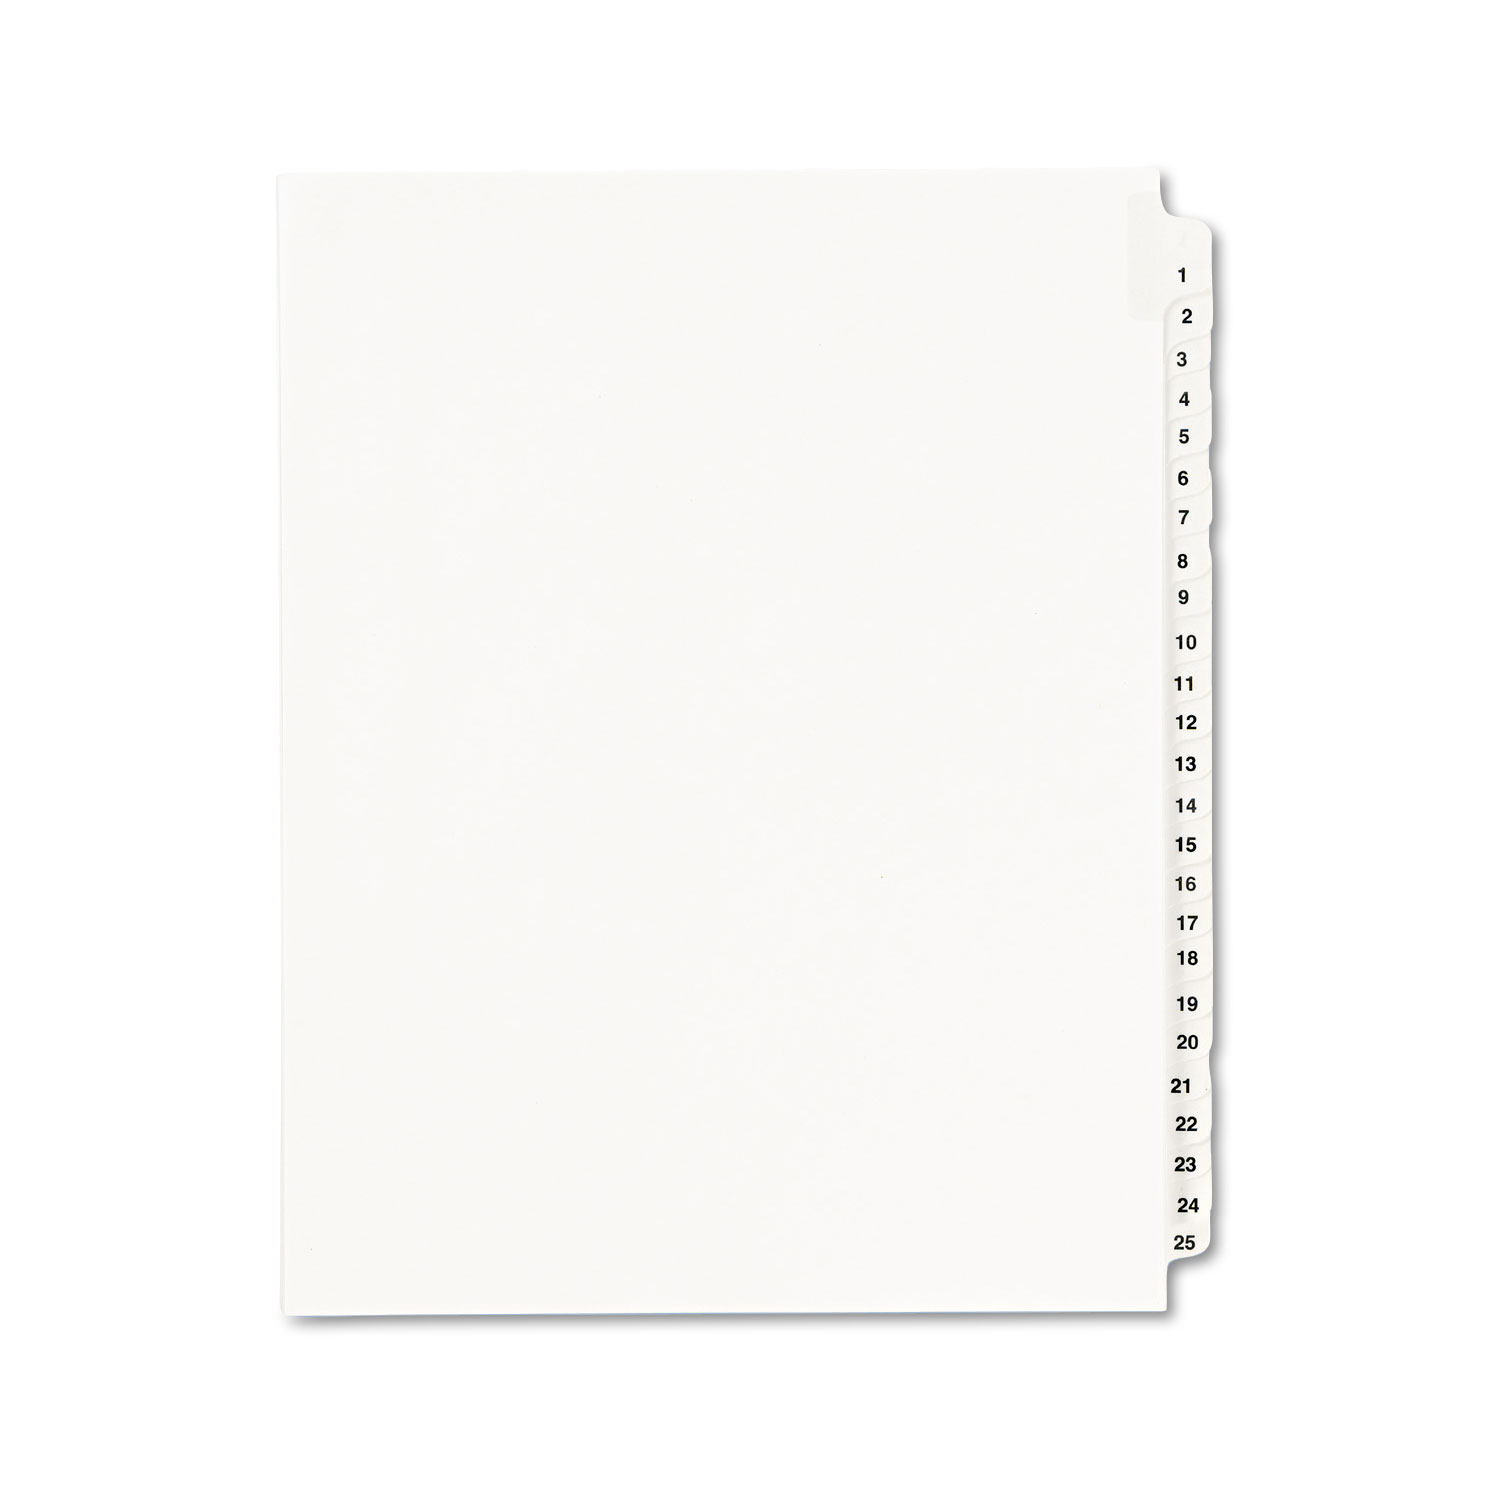 Preprinted Legal Exhibit Side Tab Index Dividers, Avery Style, 25-Tab, 1 to 25, 11 x 8.5, White, 1 Set